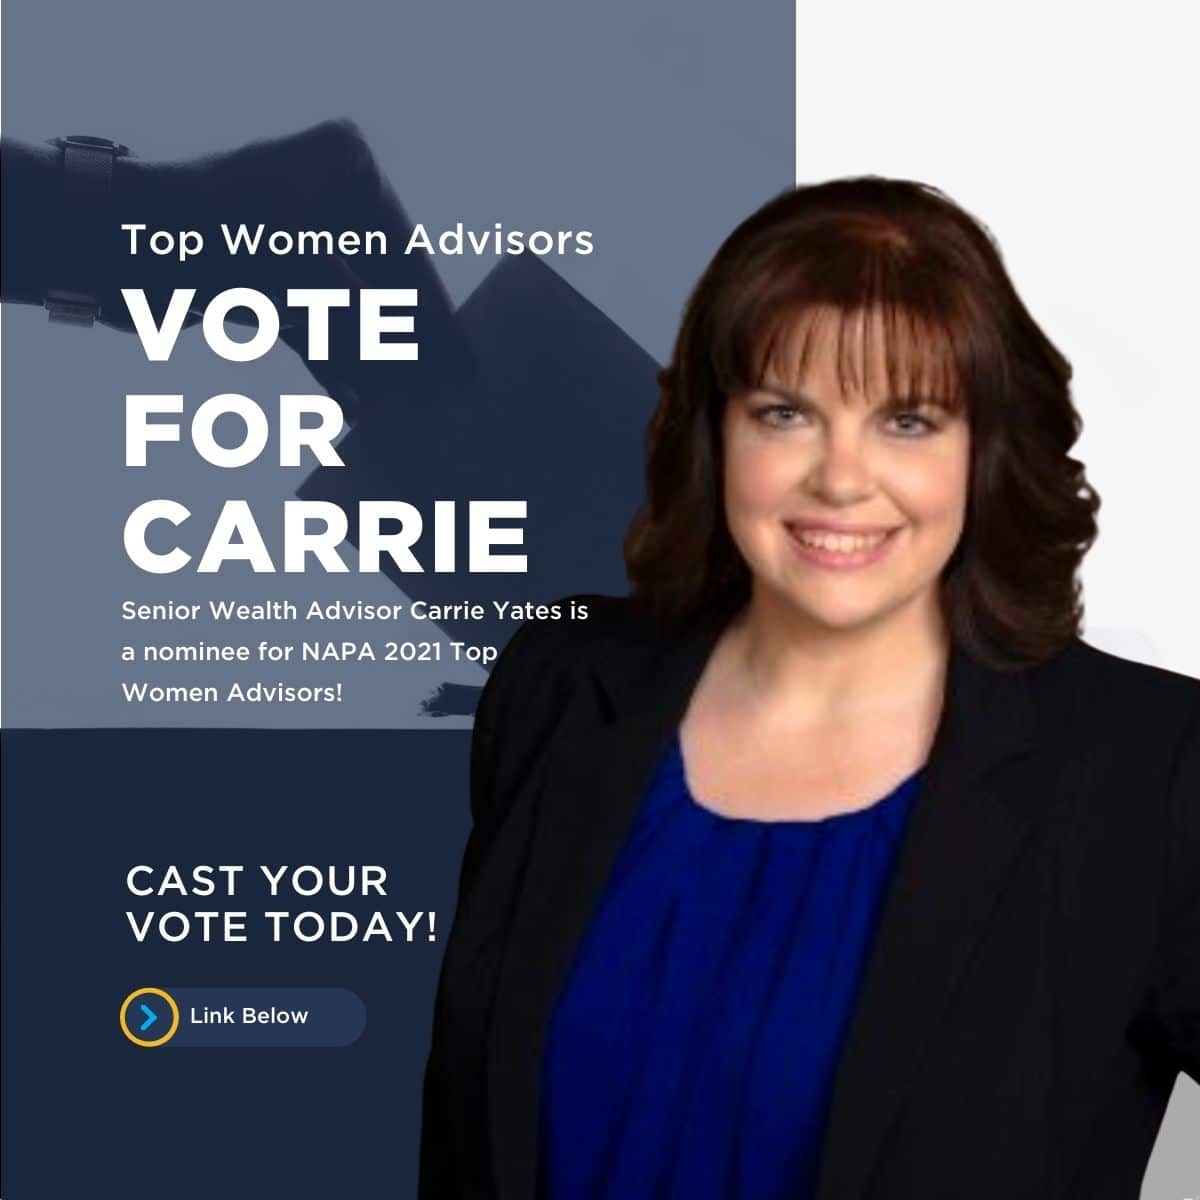 VOTE FOR CARRIE